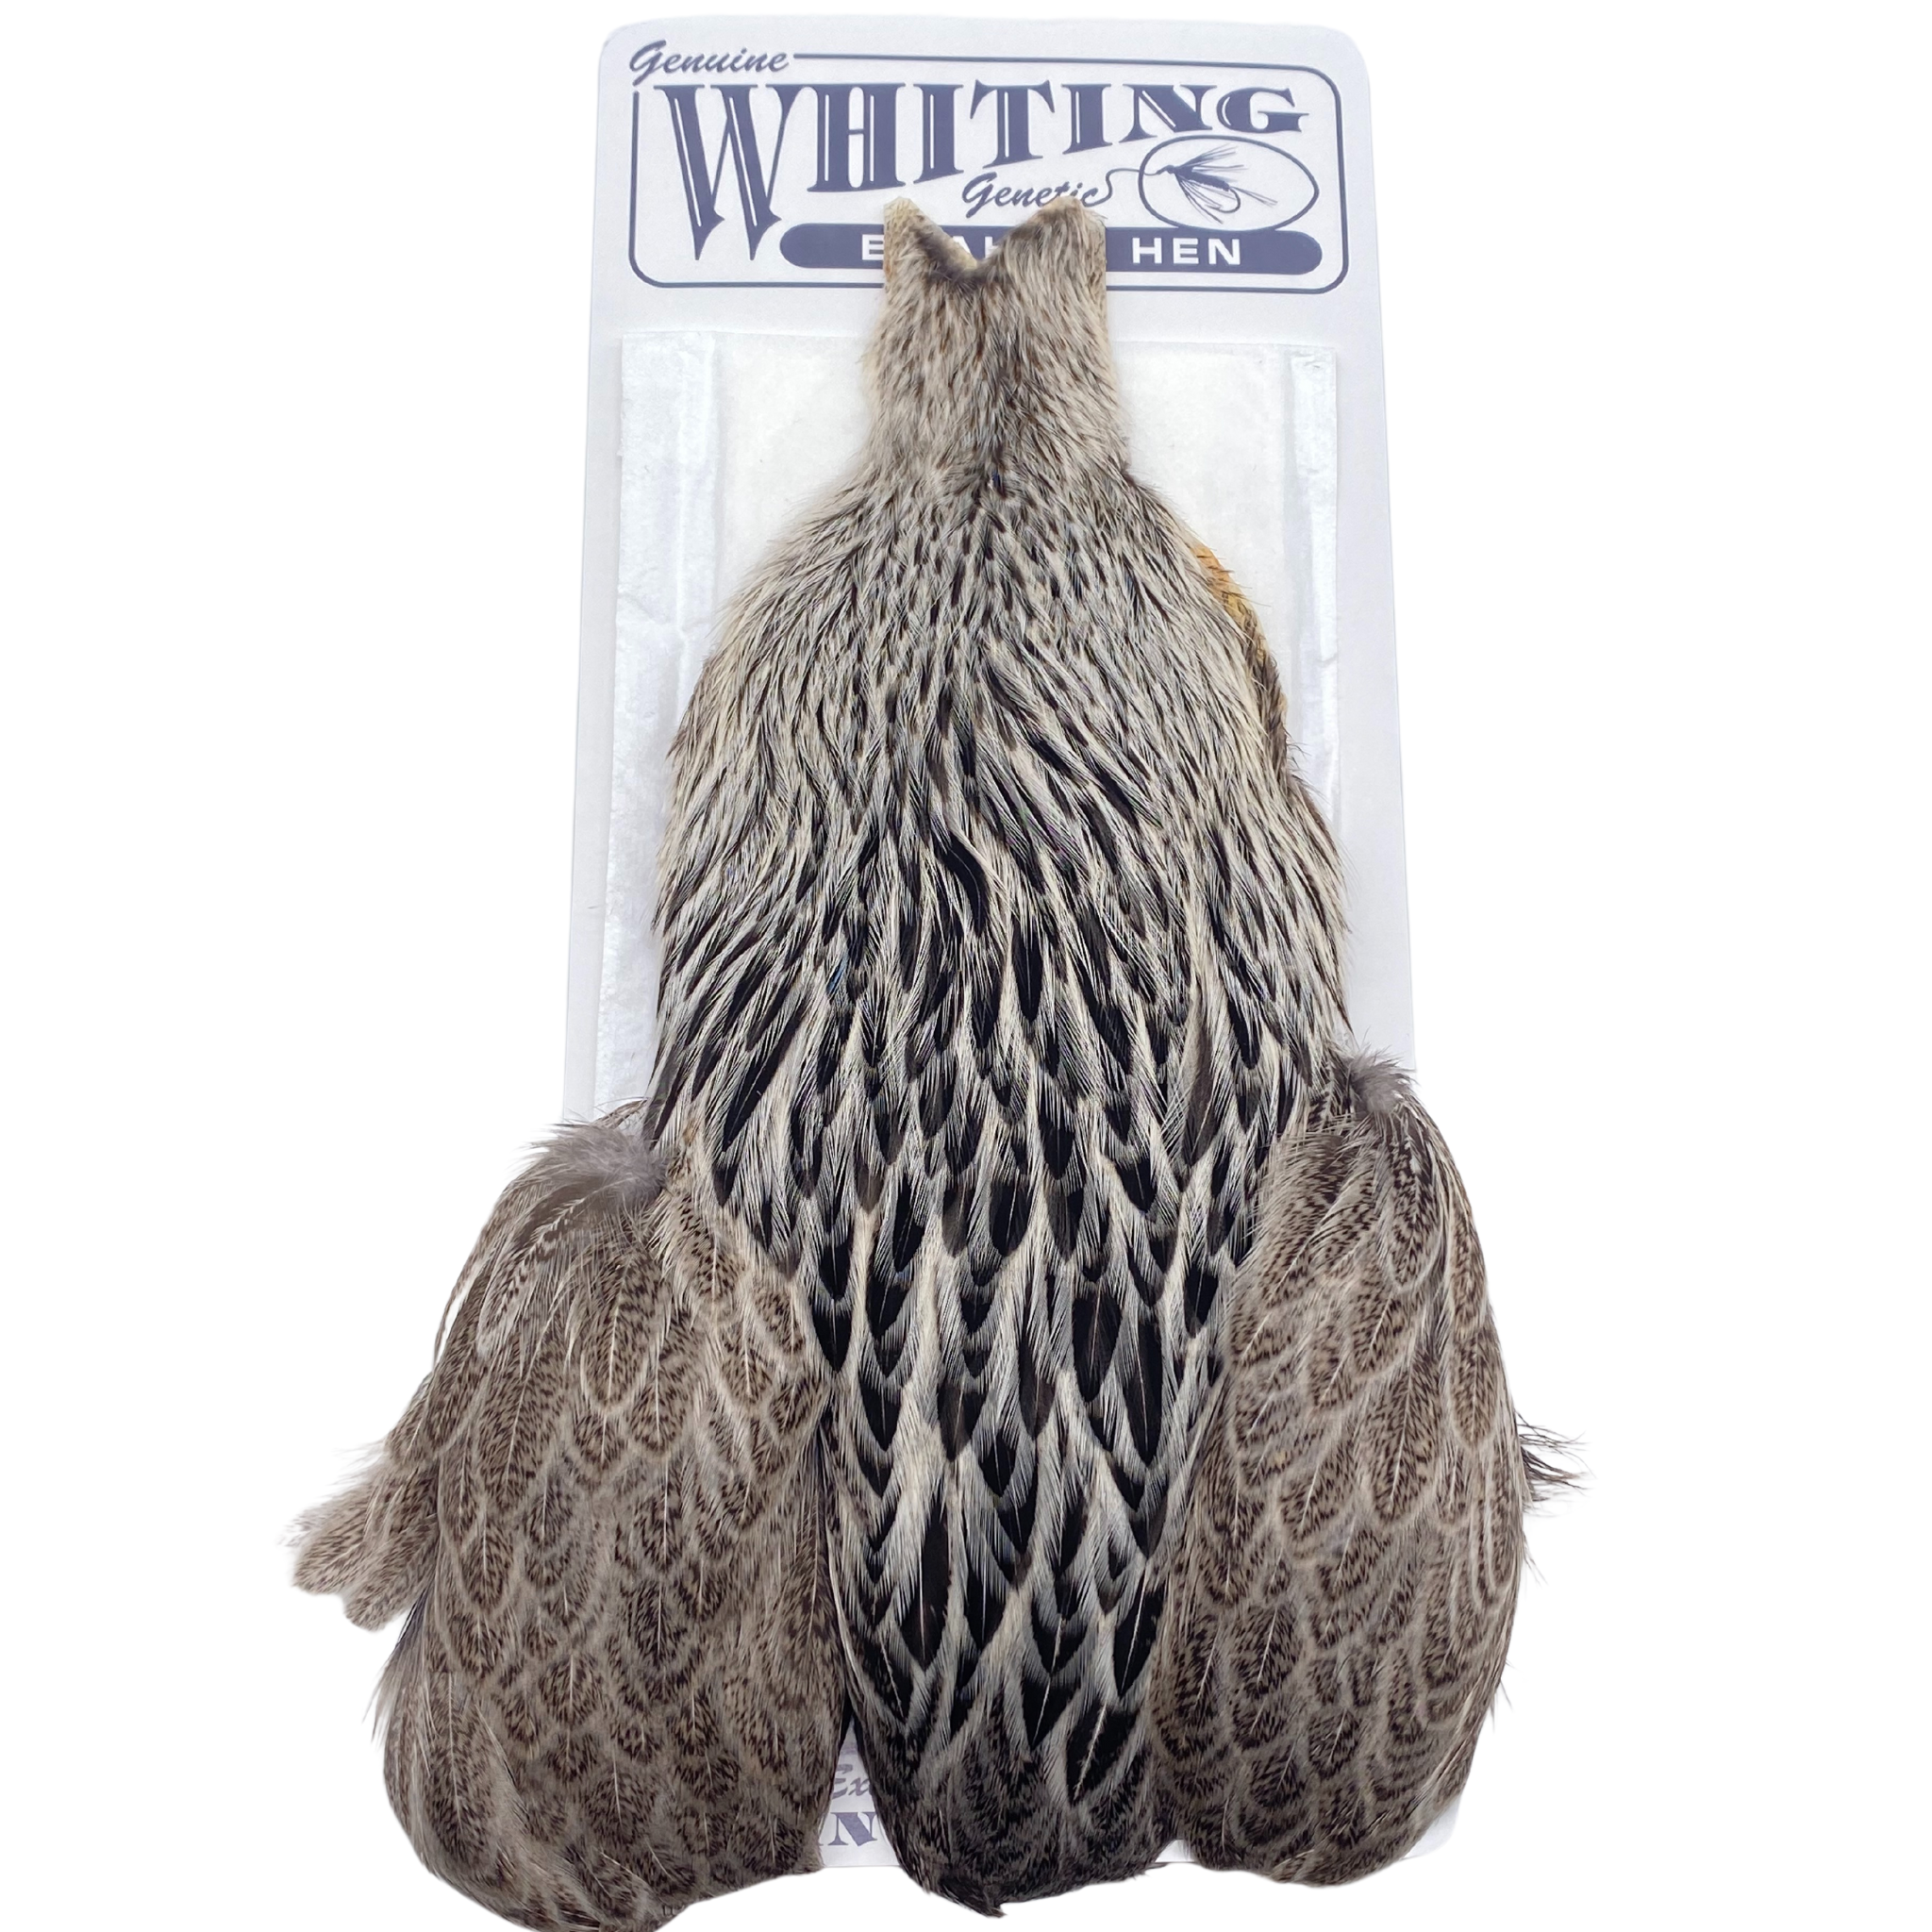 Whiting Brahma Hen Cape - ( WHITING FARMS, INC)